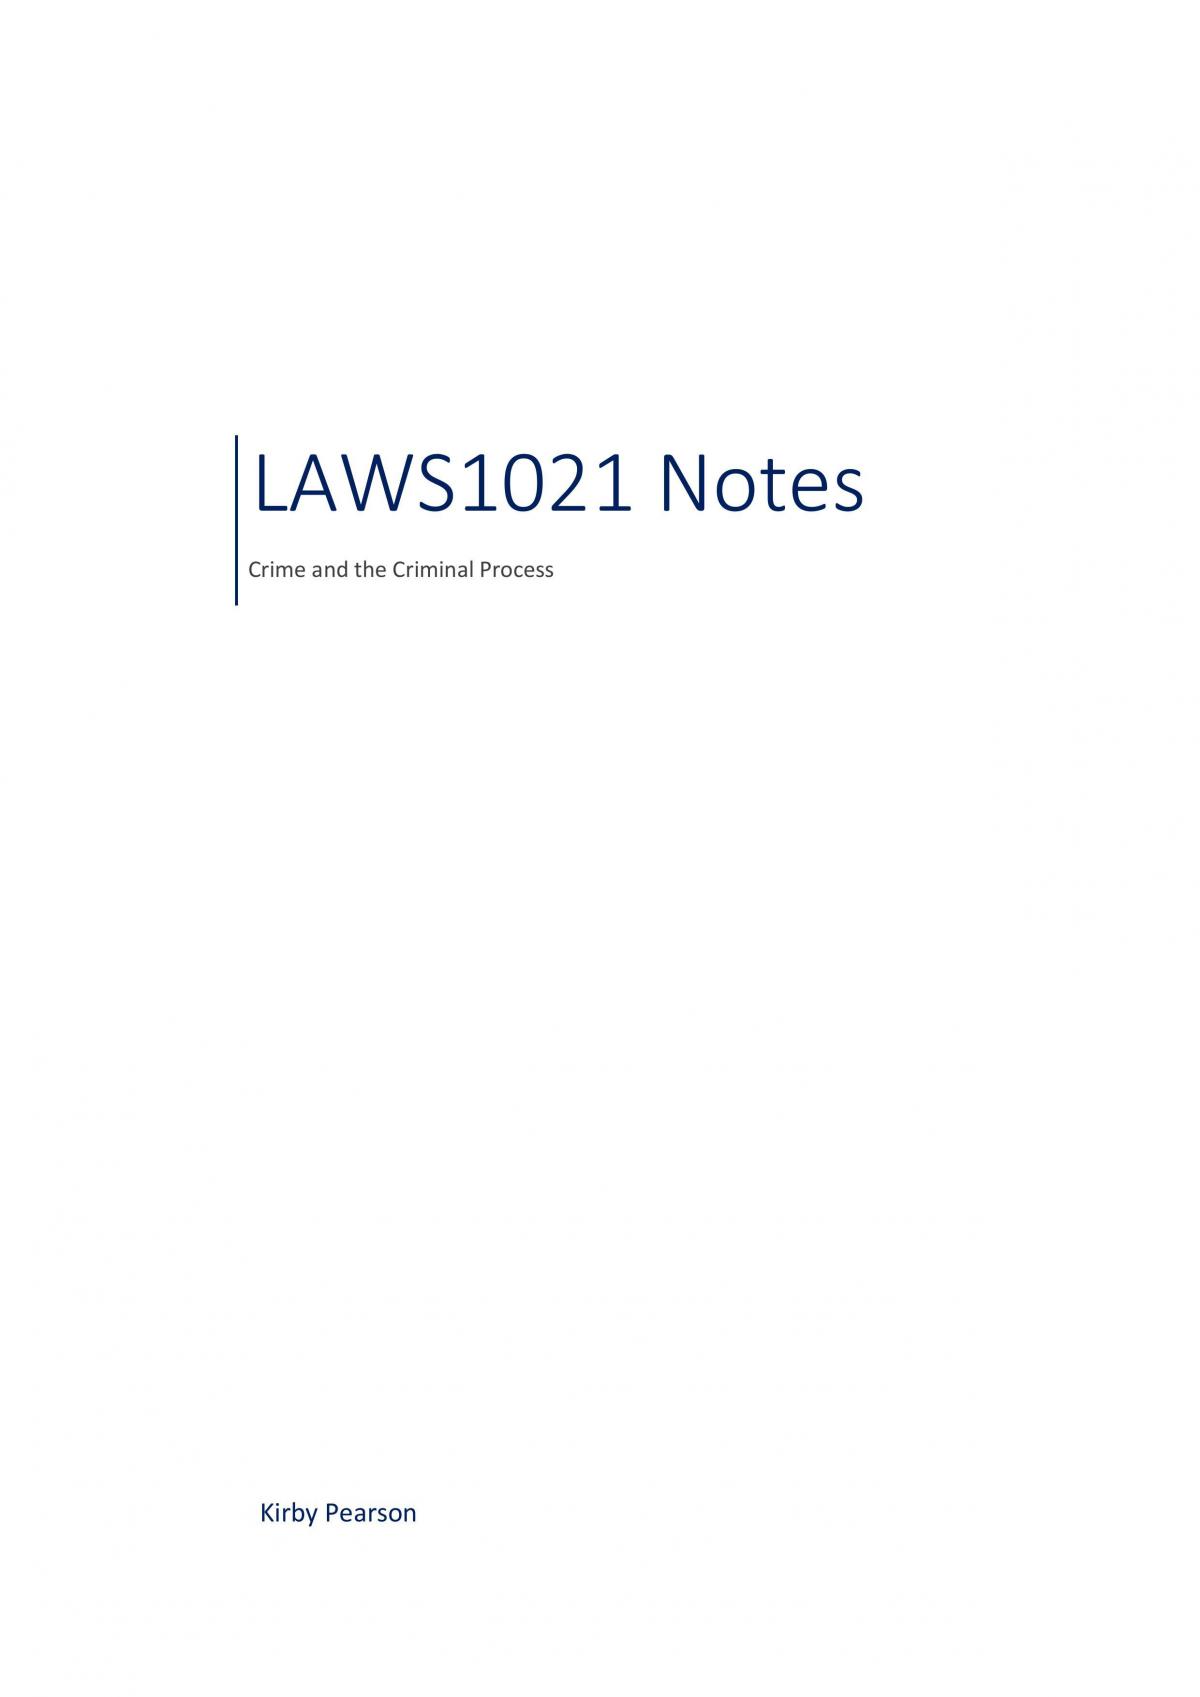 LAWS1021 Course Notes - Page 1